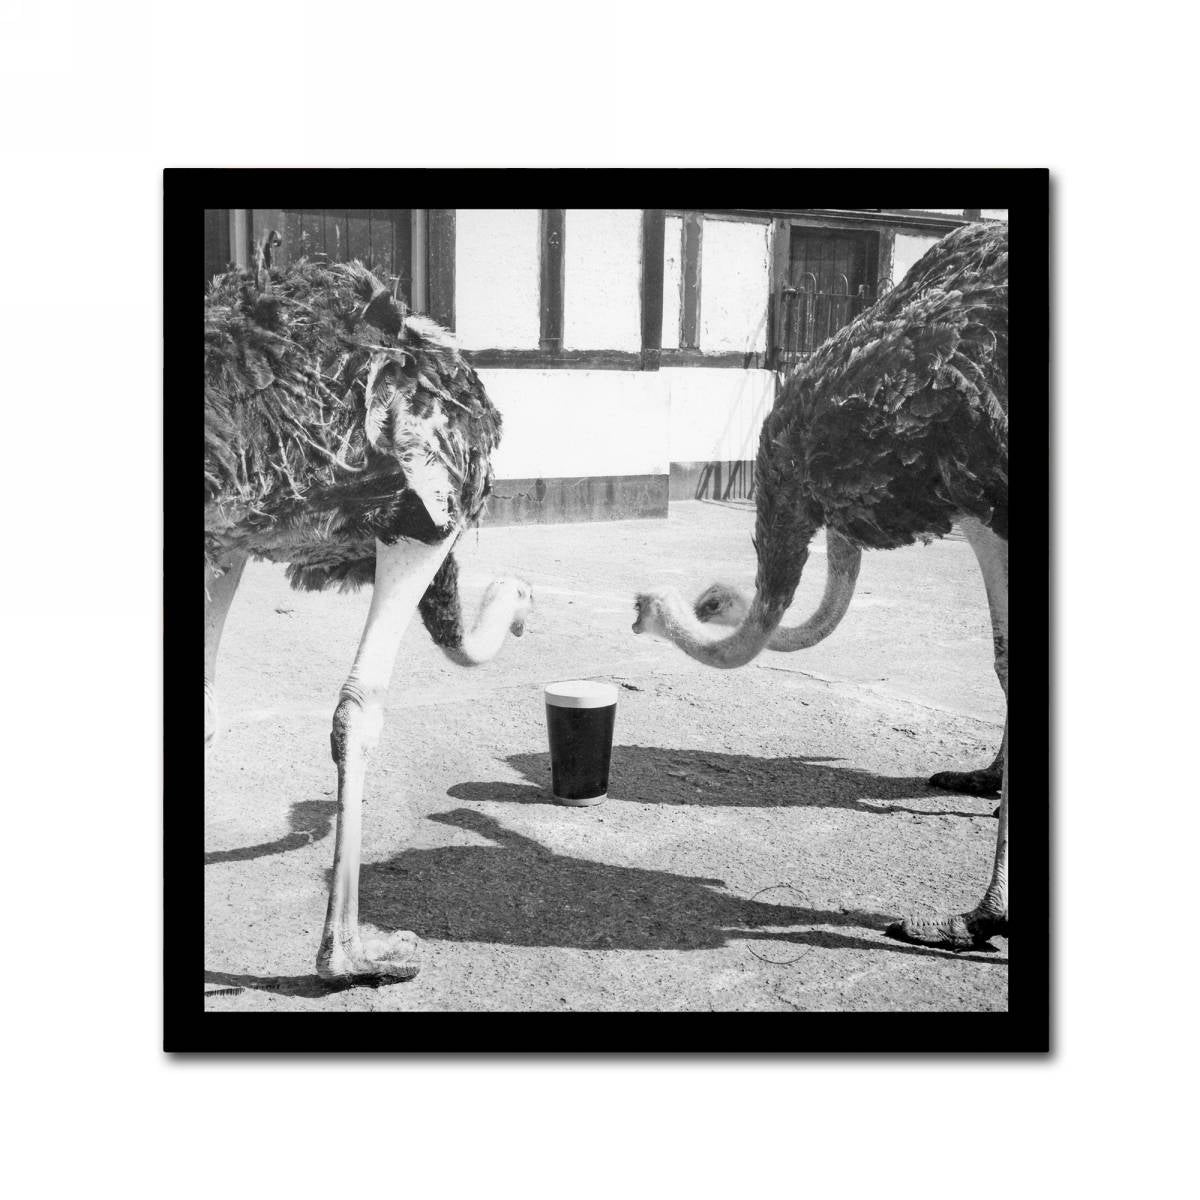 Two Guinness XVIII-century ostriches are drinking from a quirky art cup.